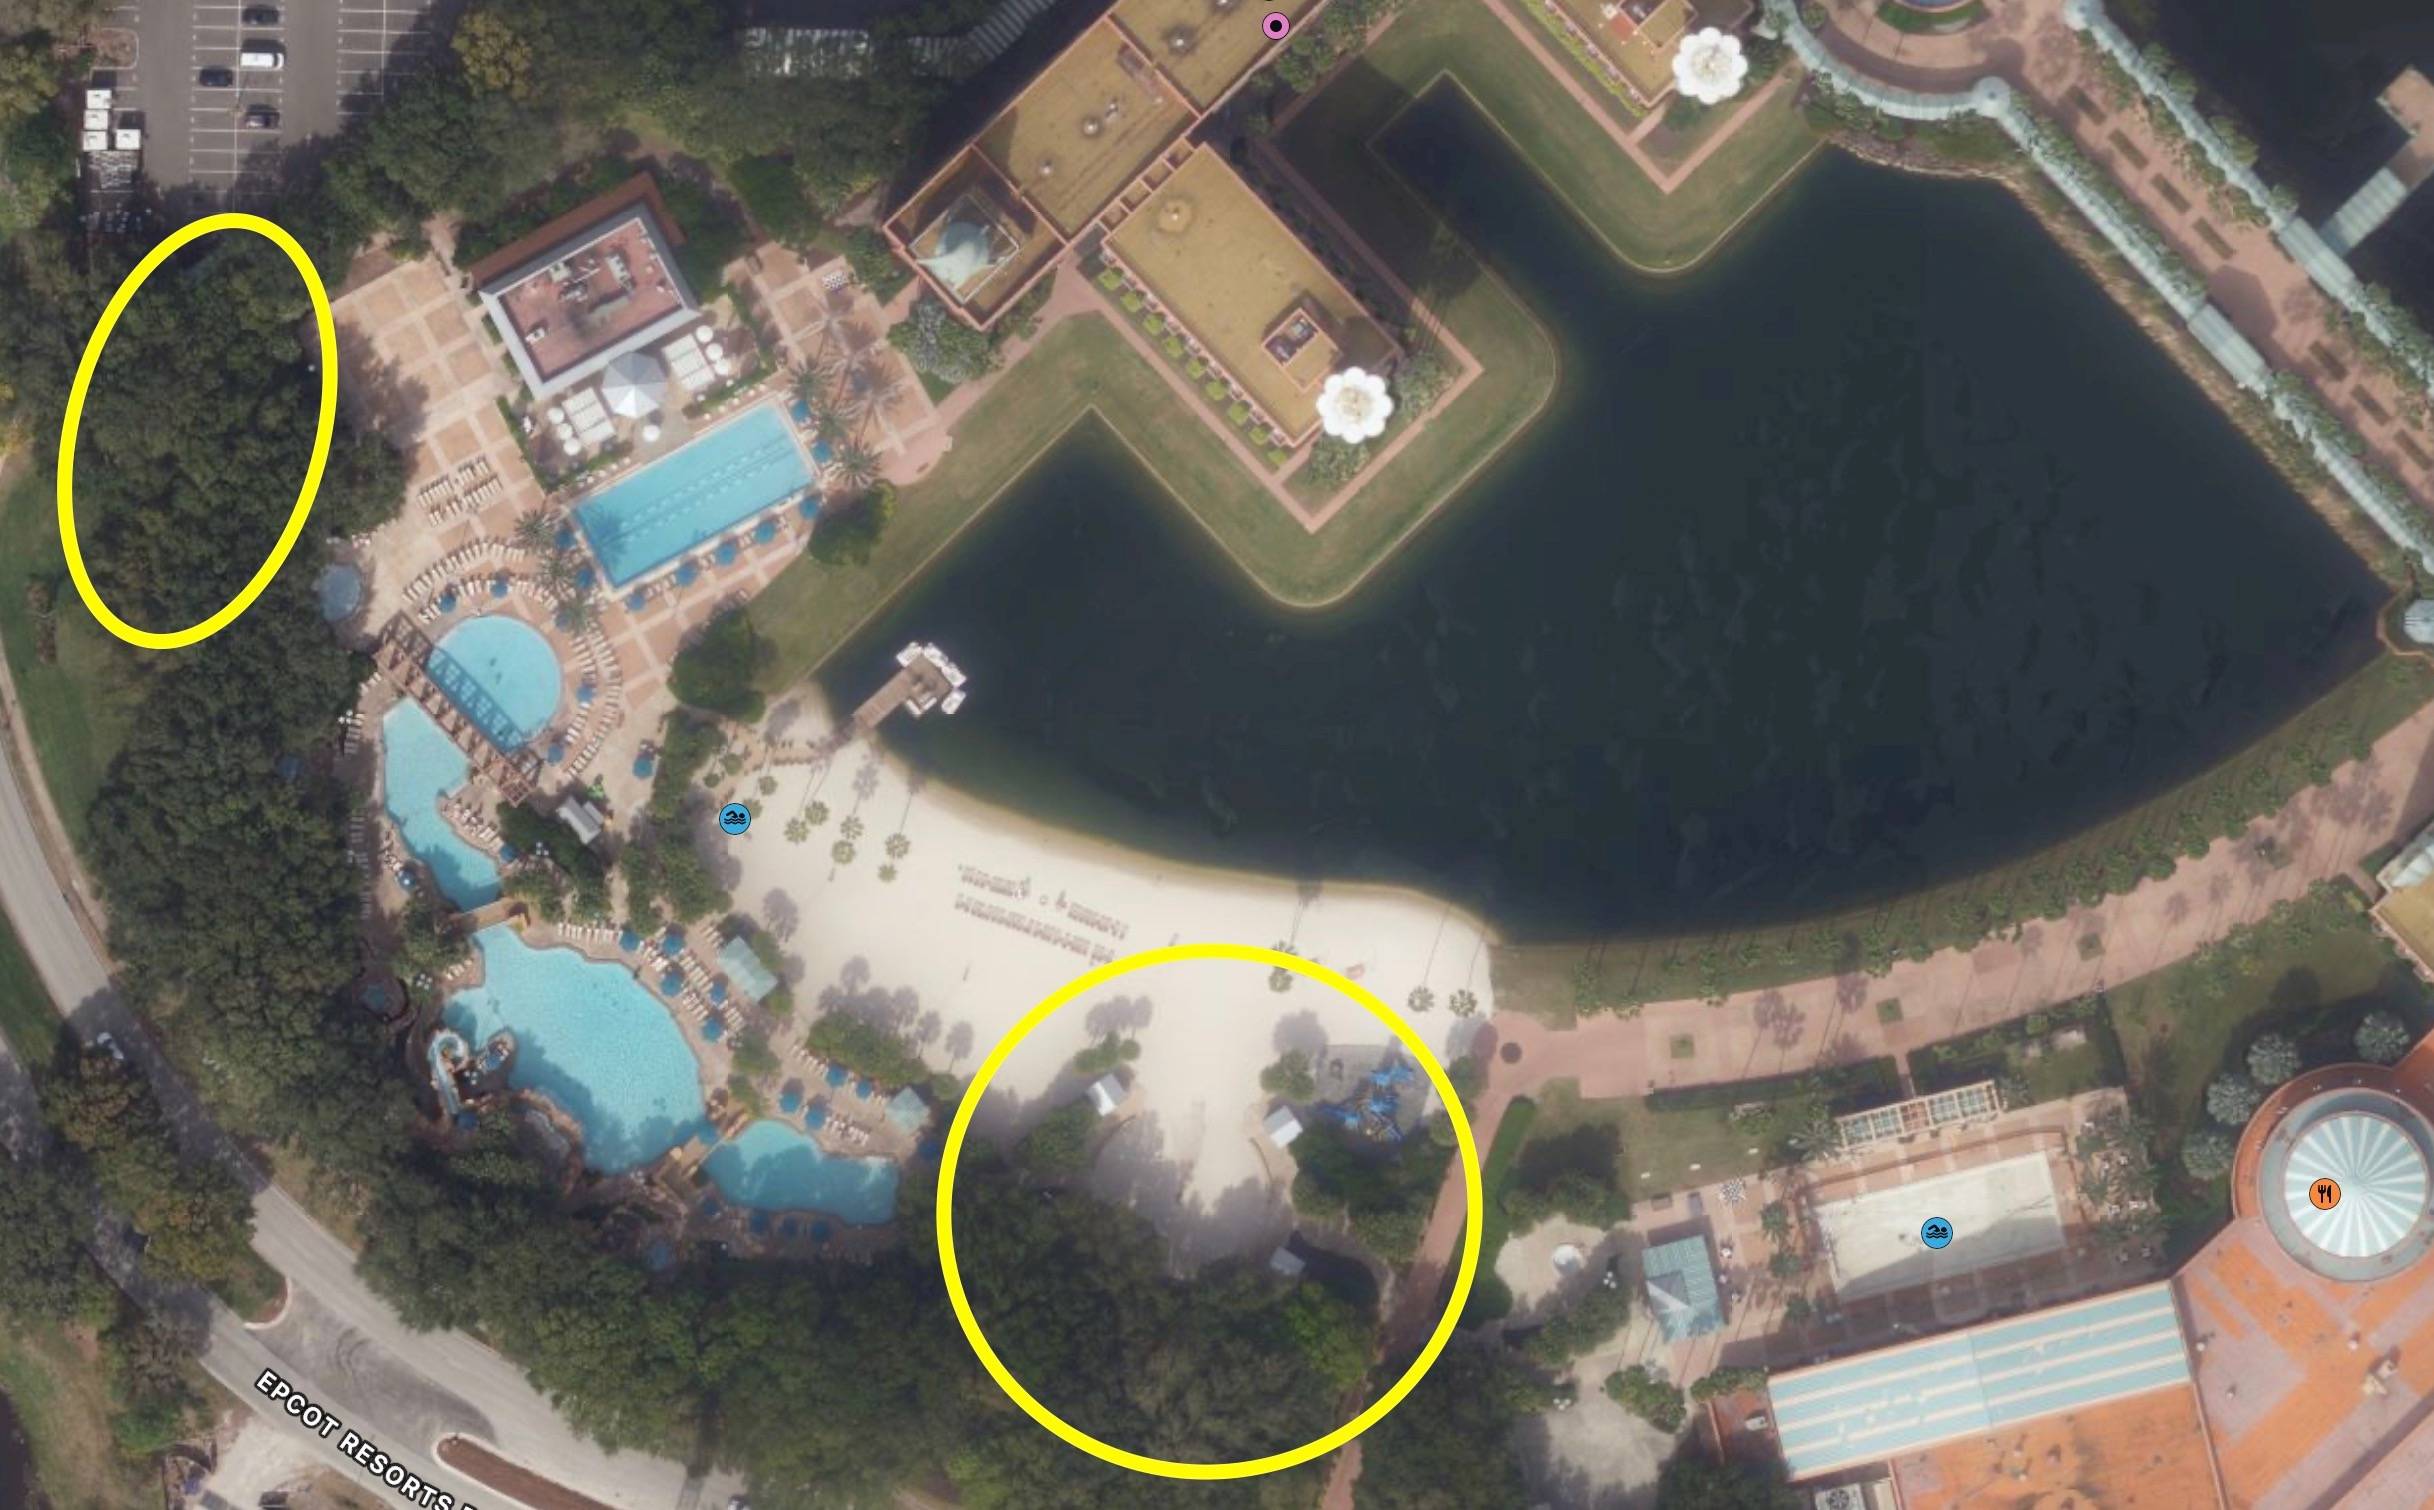 The circle on the right is the location of the new pools, and the circle on the left is the new playground area